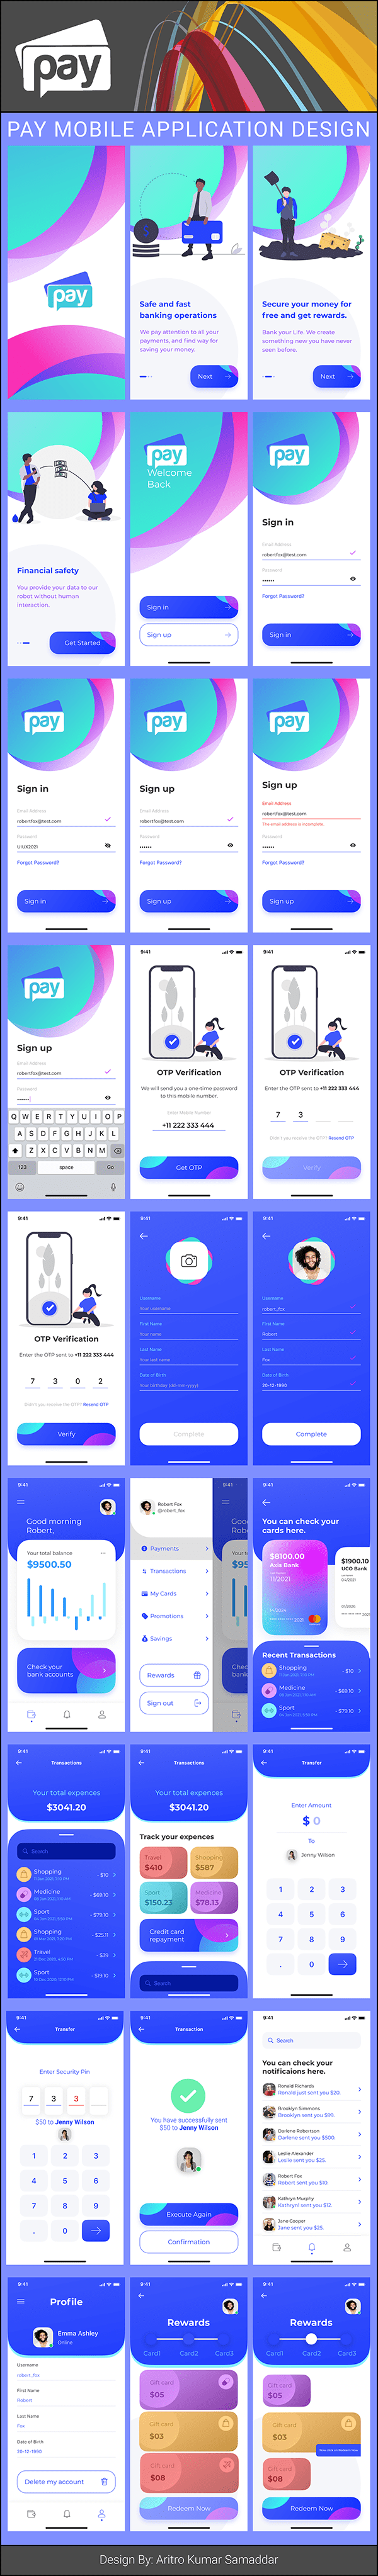 PAY MOBILE APPLICATION DESIGN